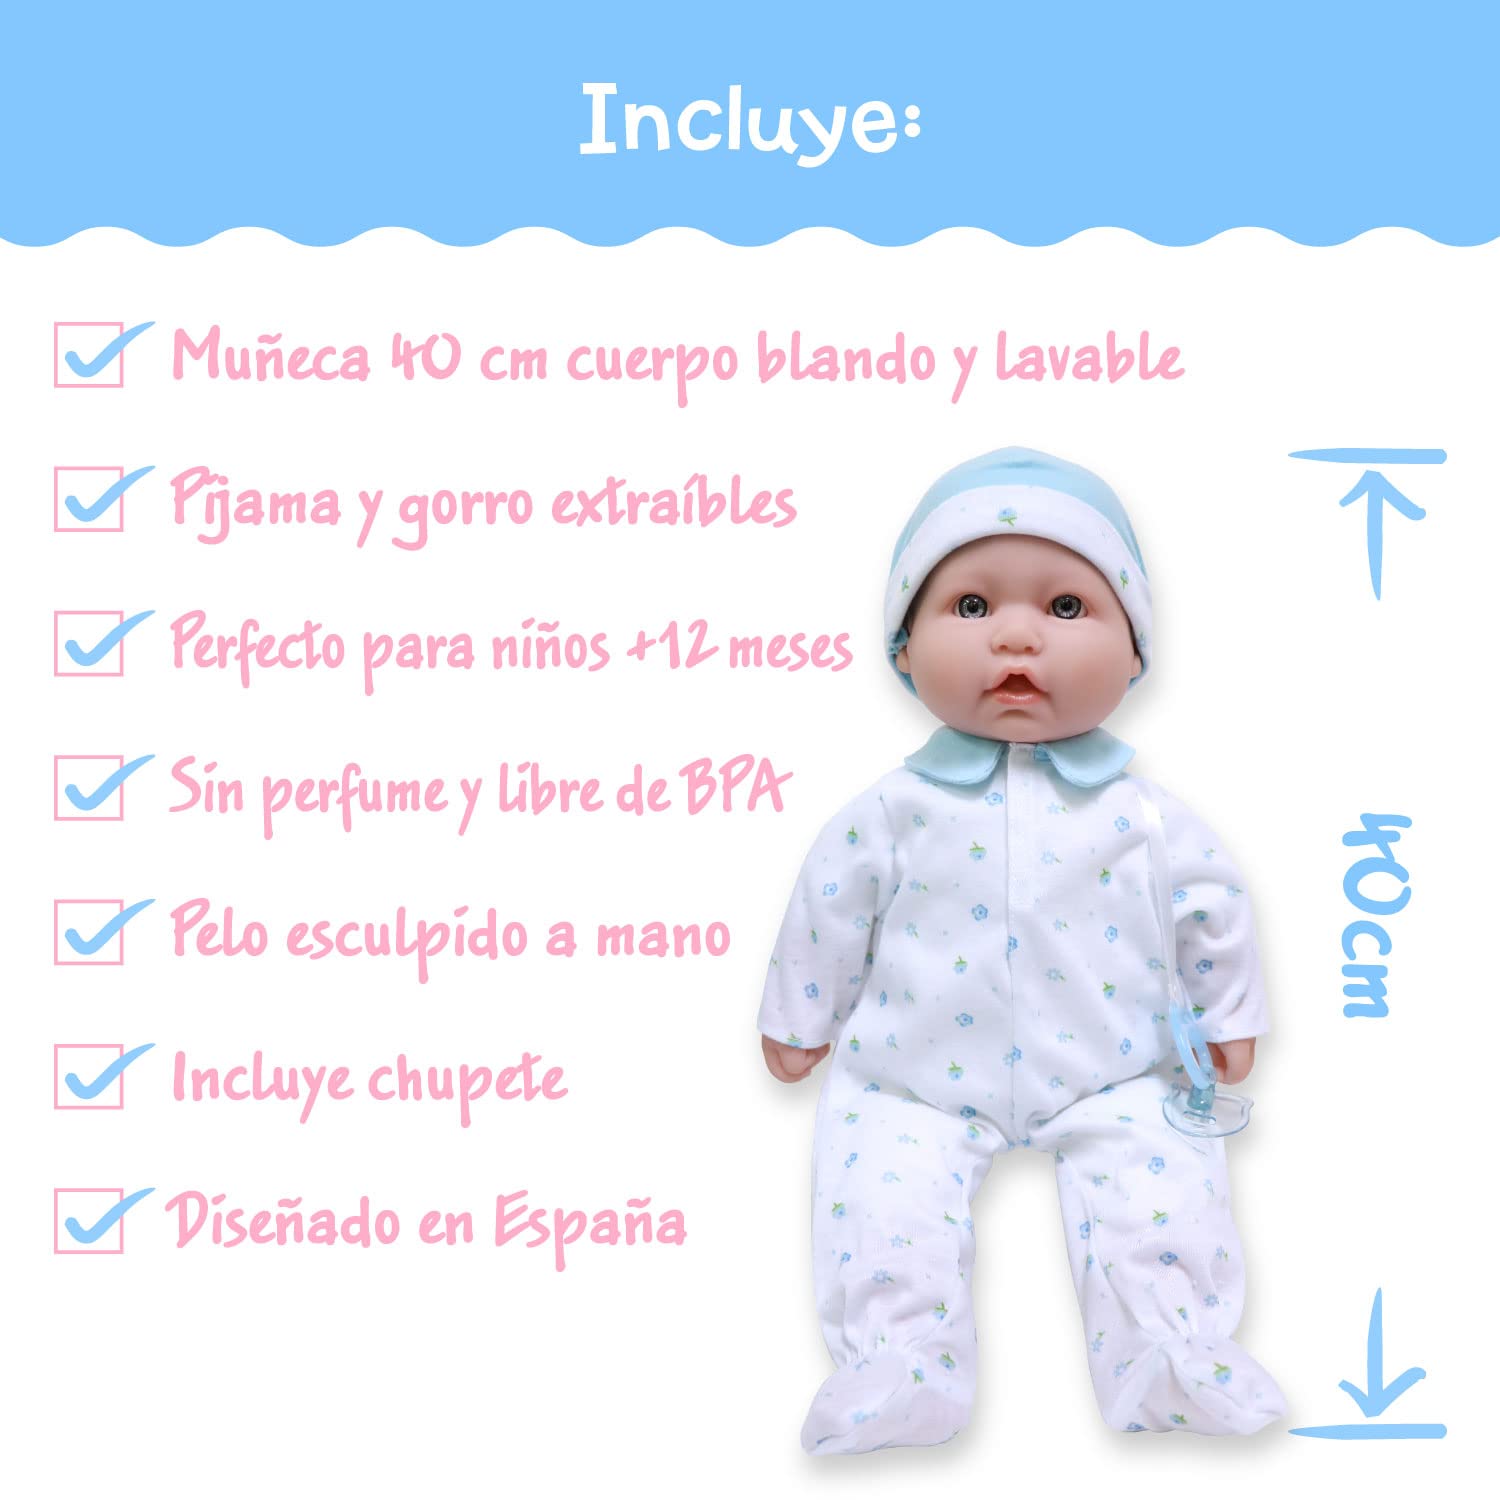 JC Toys, La Baby 16-inch Blue Washable Soft Body Boy Baby Doll with Accessories - For Children 12 Months and older, Designed by Berenguer